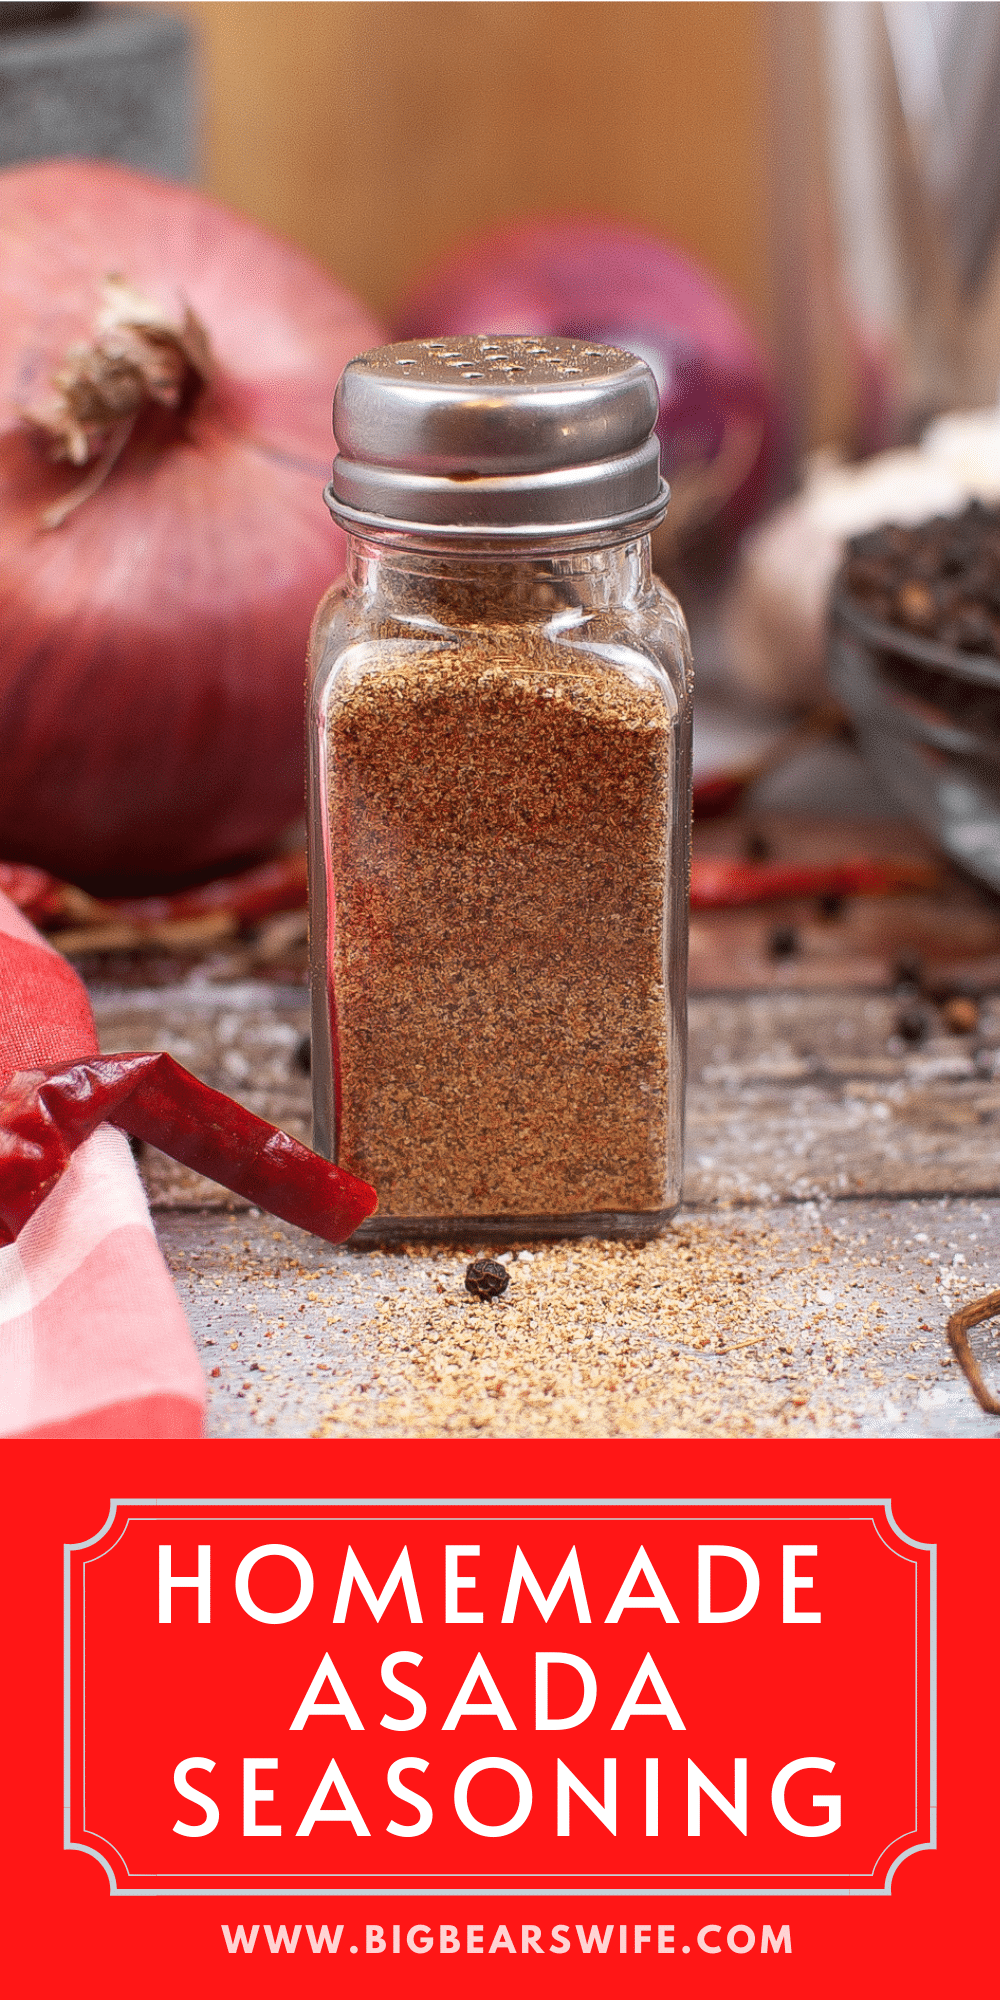 A great Homemade Asada Seasoning recipe that's prefect for streaks, tacos and burritos. Made with easy to find spices! via @bigbearswife